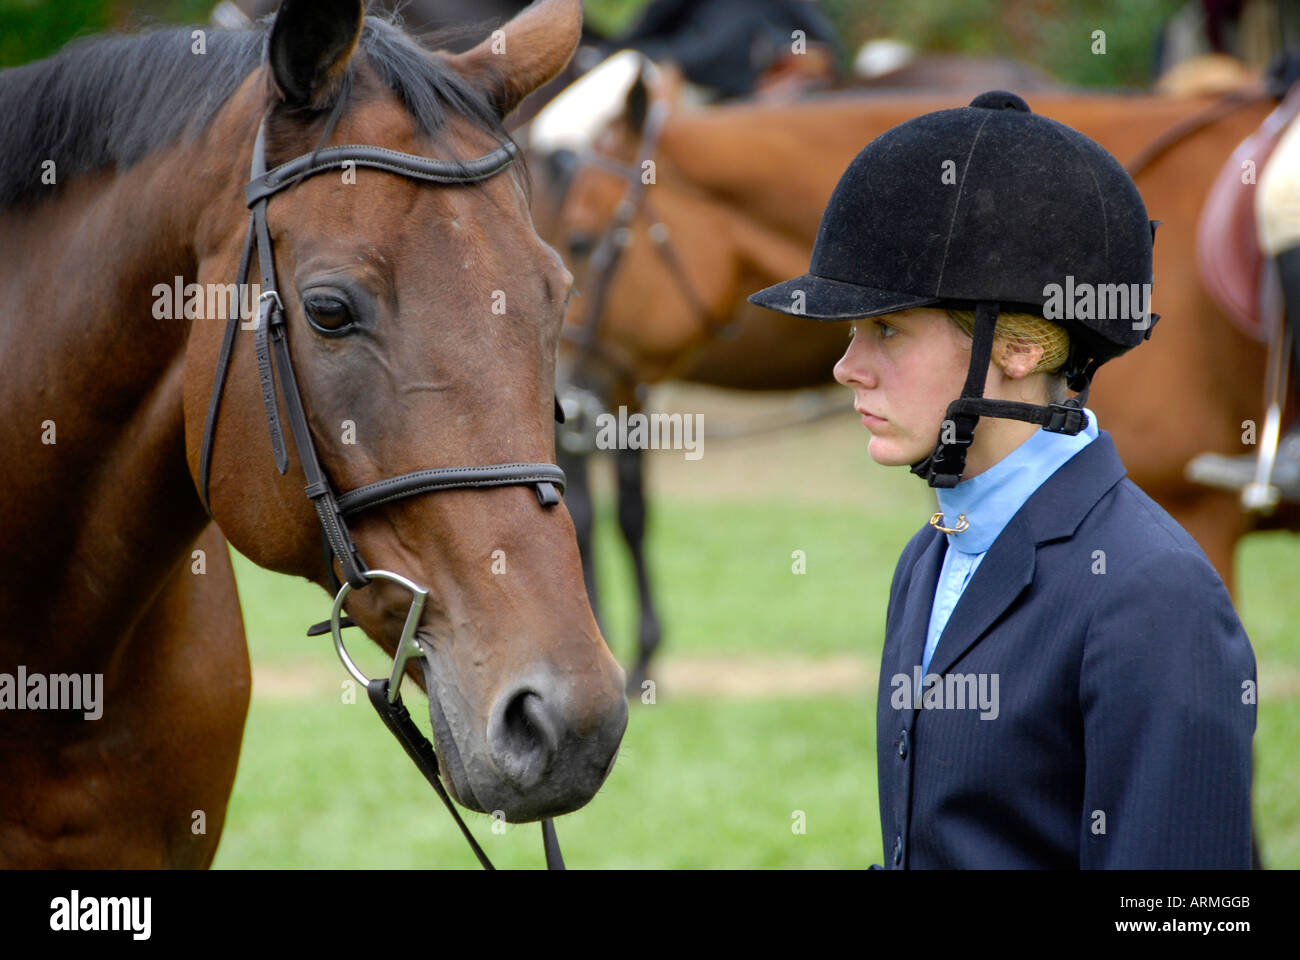 High school female student competes in equestrian event Stock Photo